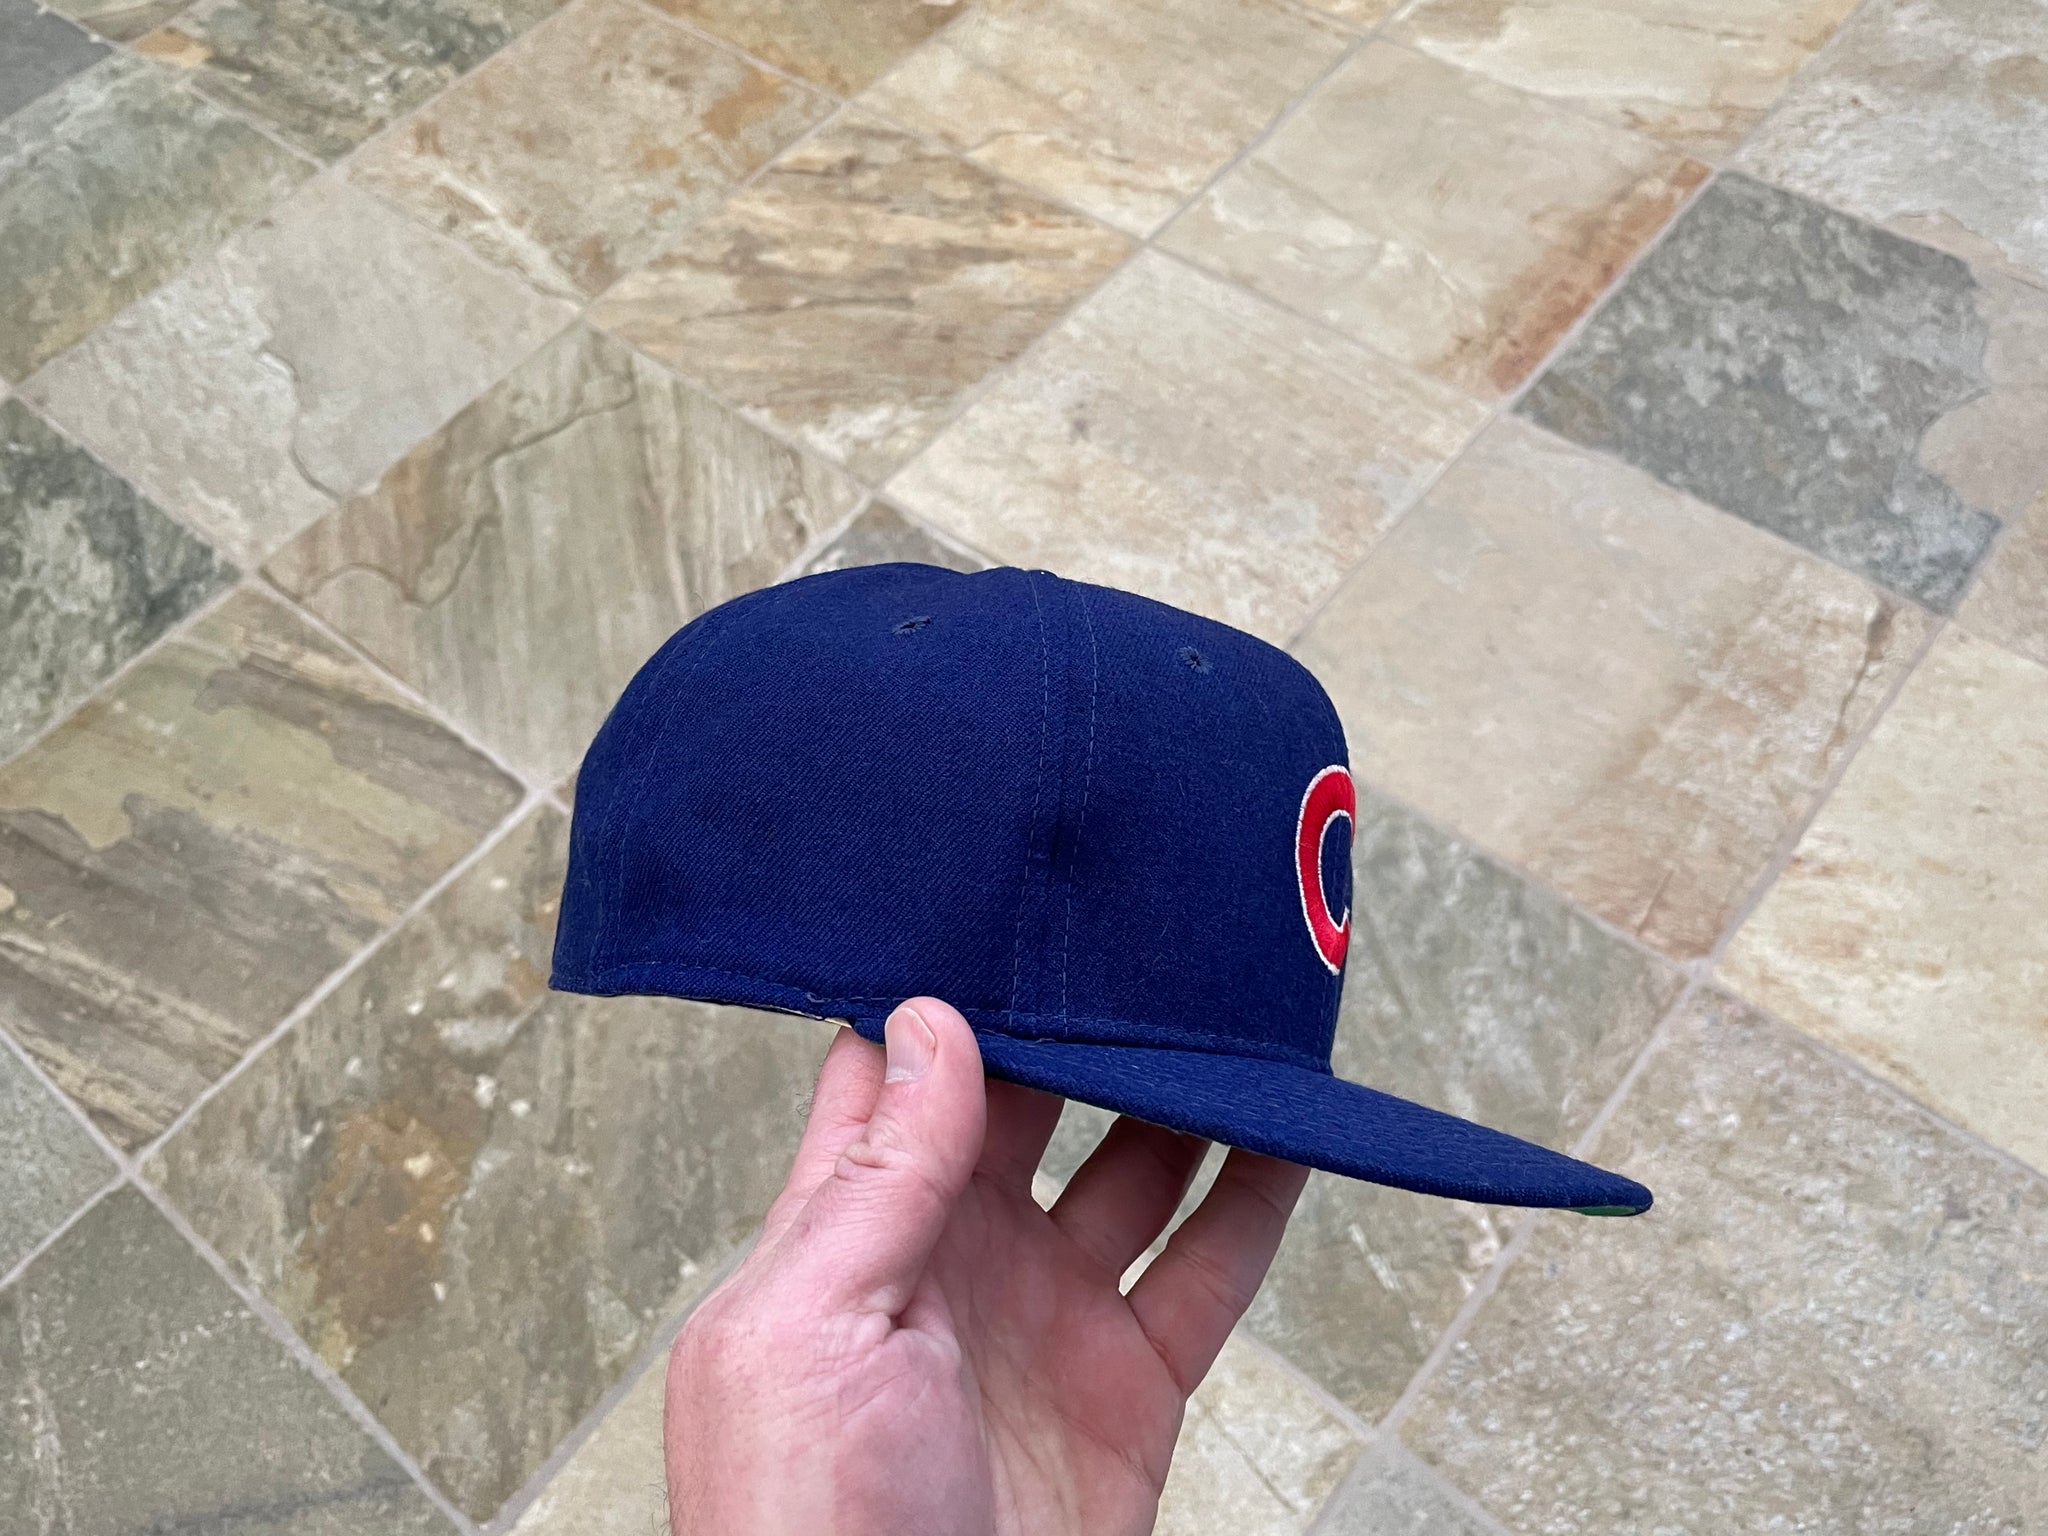 Chicago Cubs Pro Cap Sport Specialties Snapback Adjustable Hat by Nike